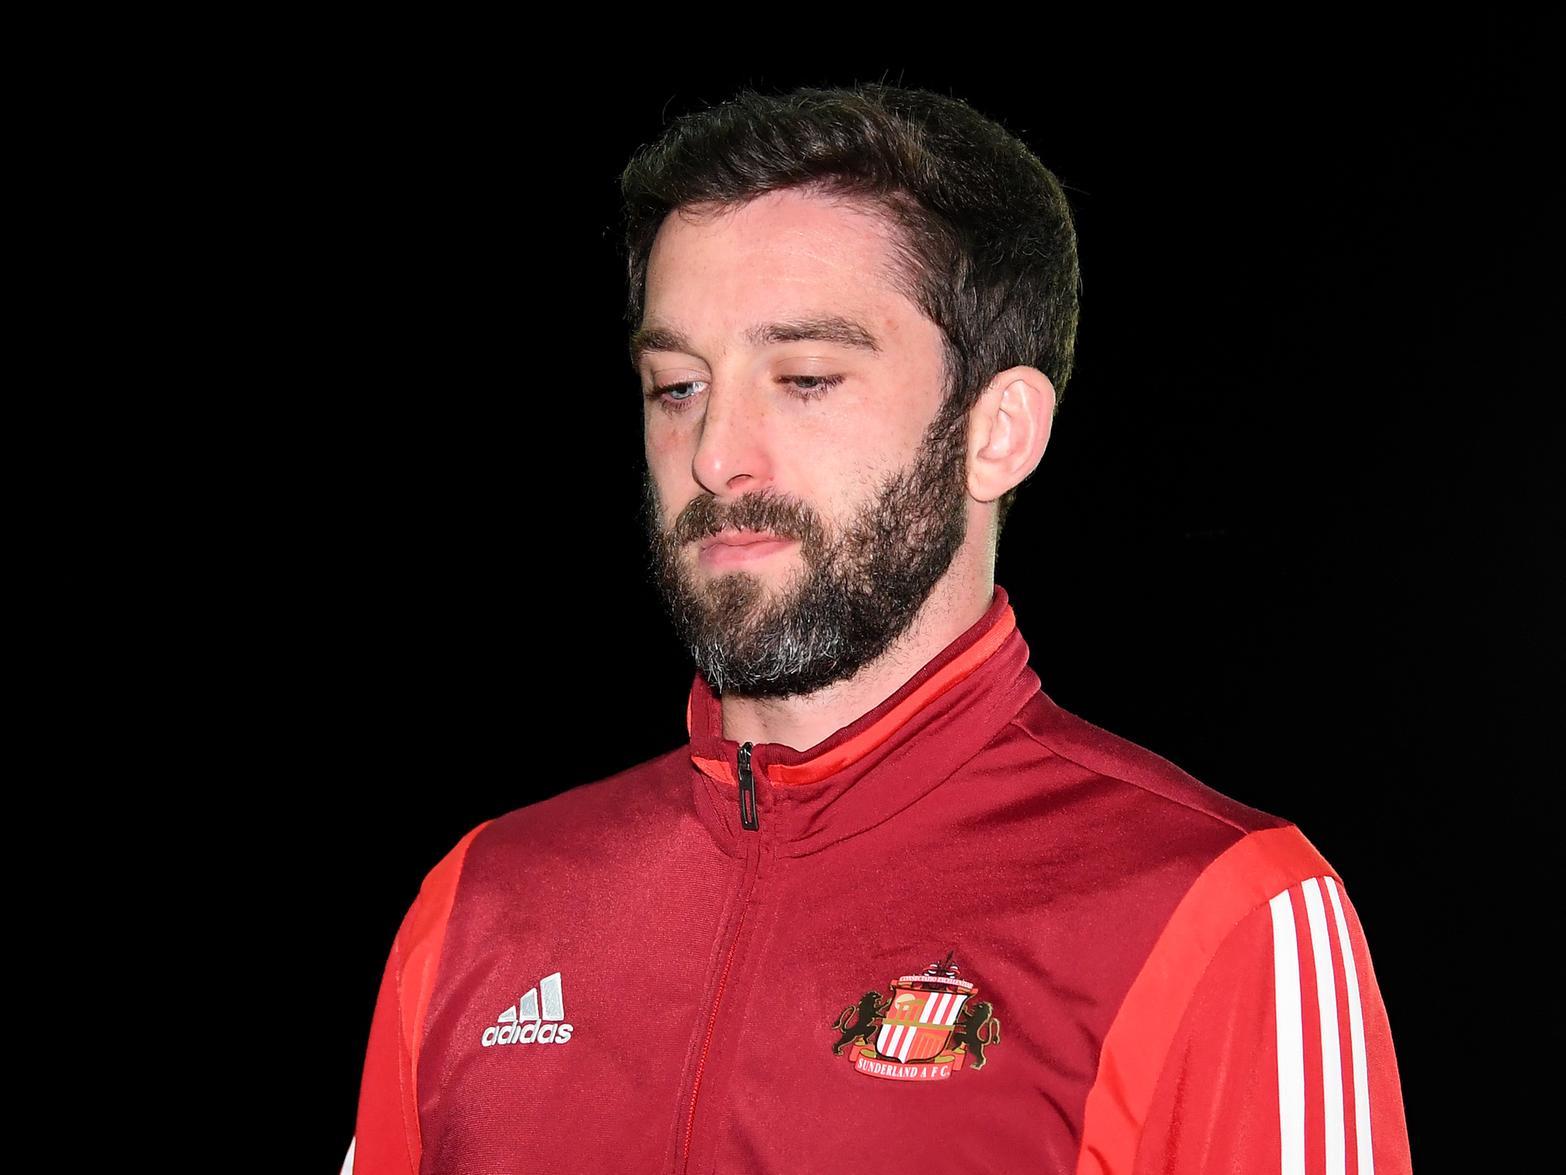 Sunderlands League One rivals Blackpool continue to be linked with a January move for misfiring striker Will Grigg. (Shields Gazette)